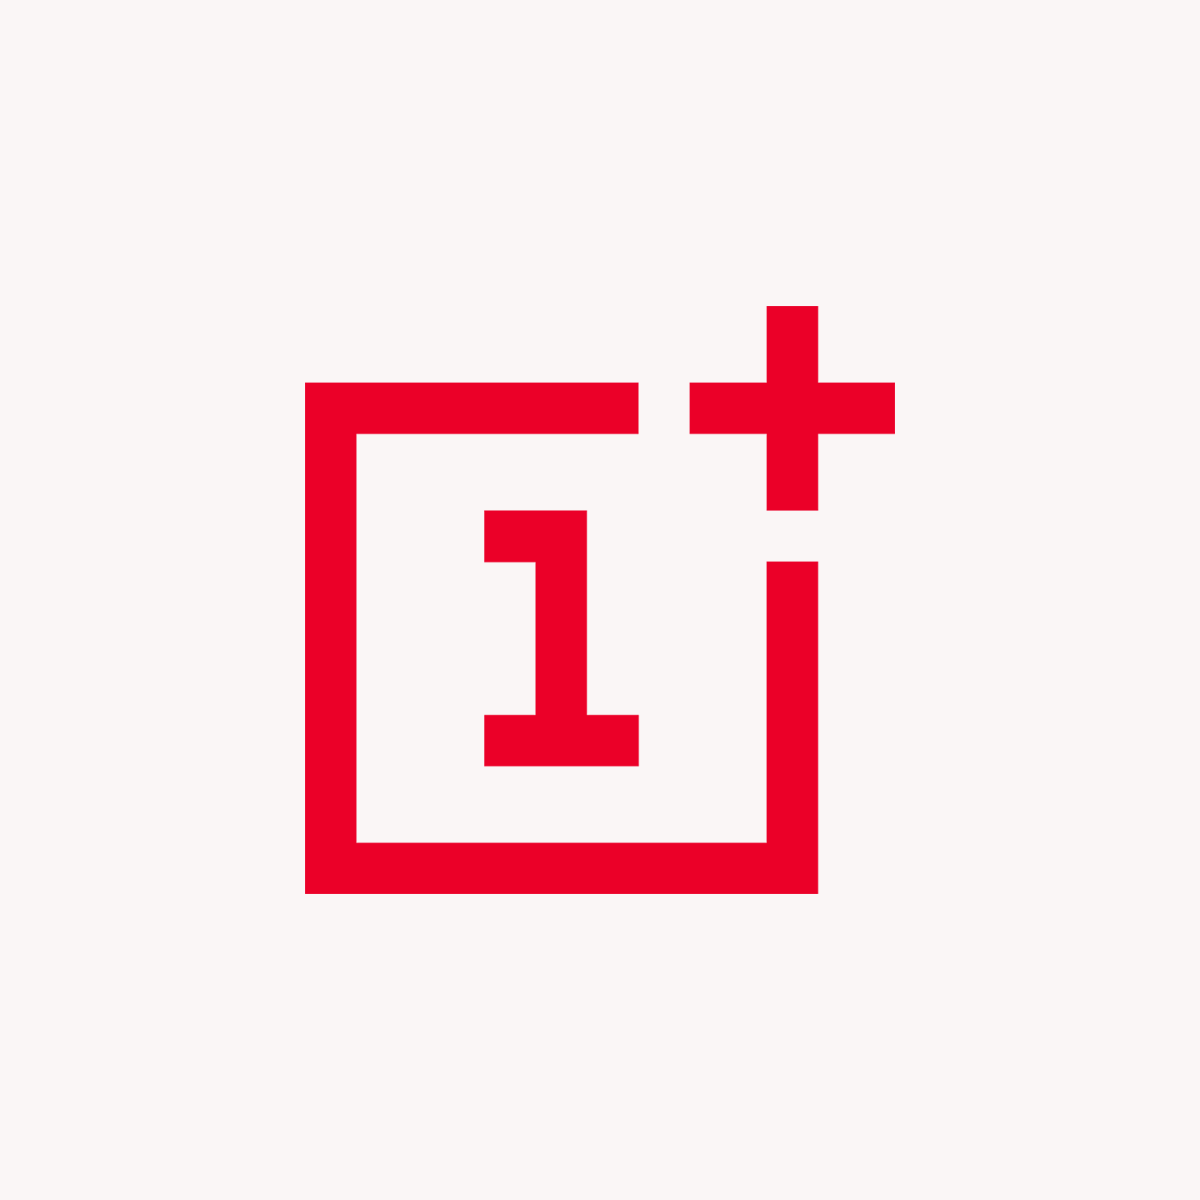 Red Square with White Plus Sign Logo - Never Settle - OnePlus (United States)